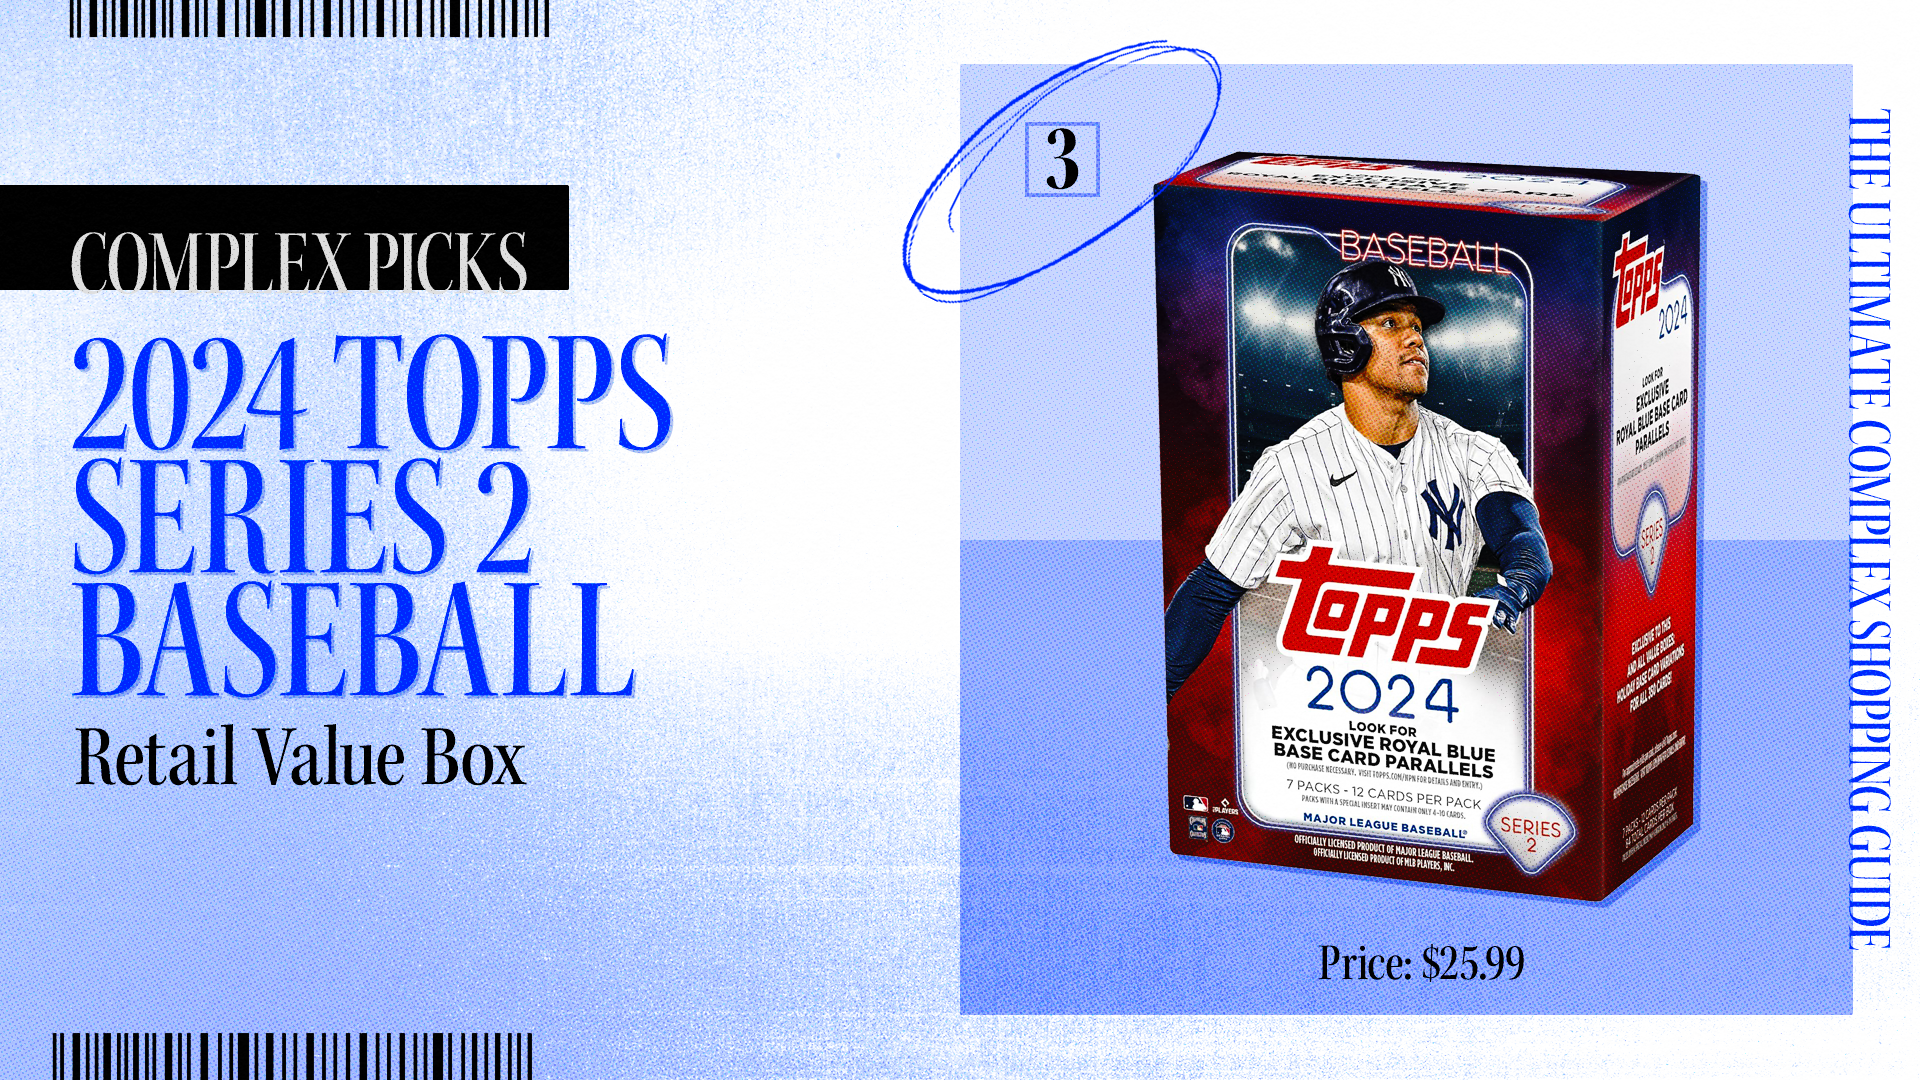 Complex Picks highlights the &quot;2024 Topps Series 2 Baseball Retail Value Box,&quot; priced at $25.99, featured in The Ultimate Complex Shopping Guide